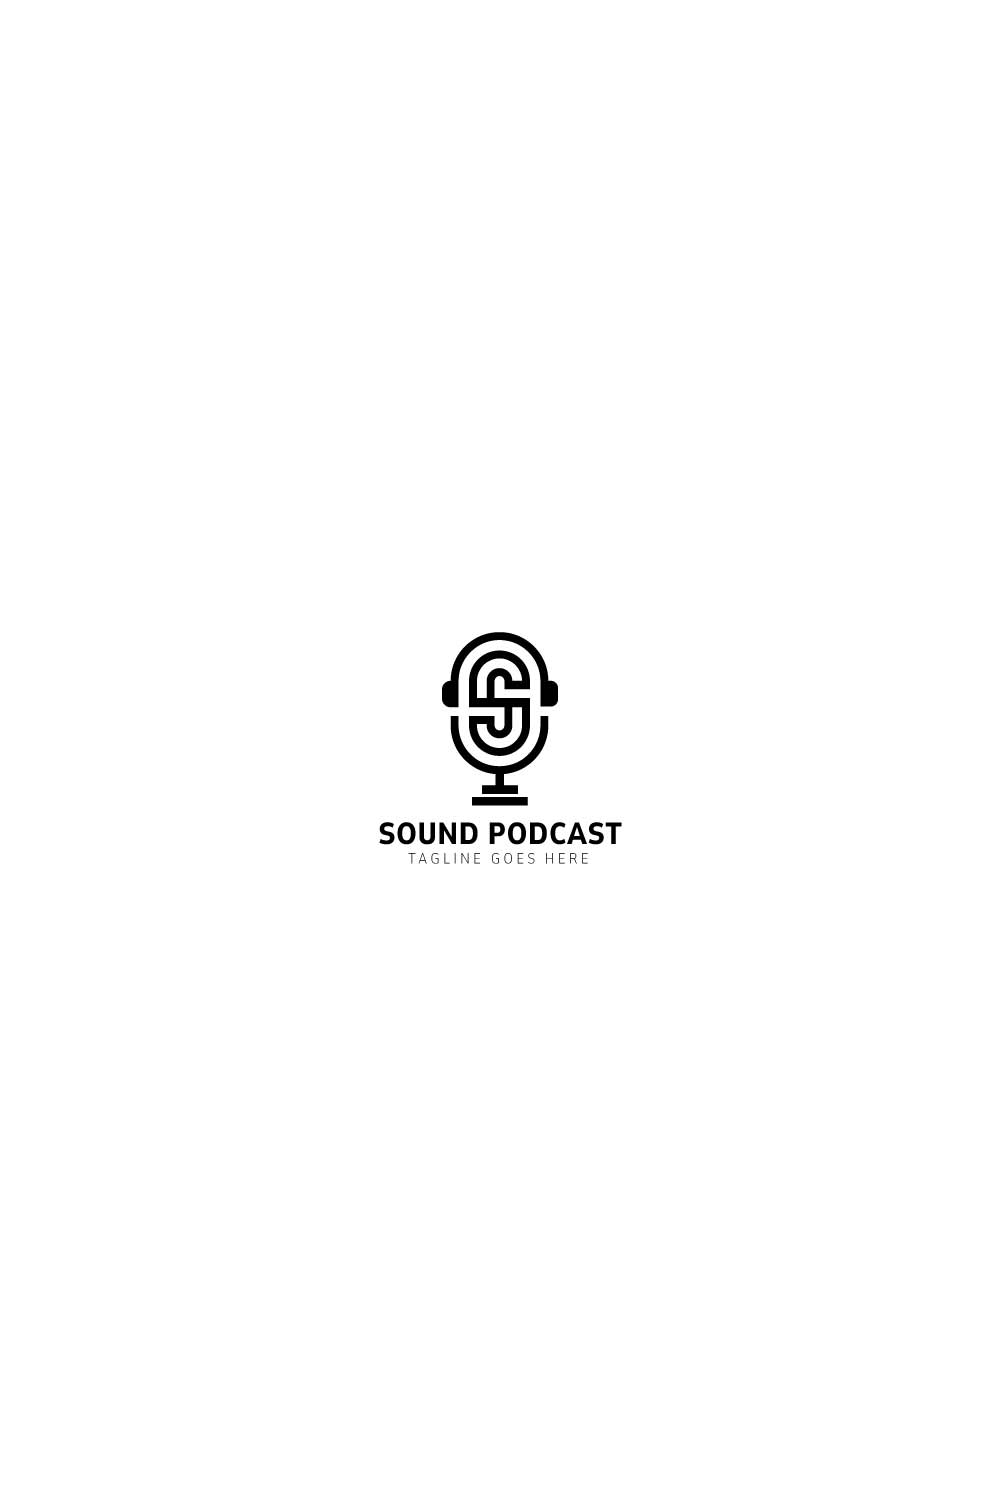 Podcast mic icon symbol logo microphone talk audio pinterest preview image.